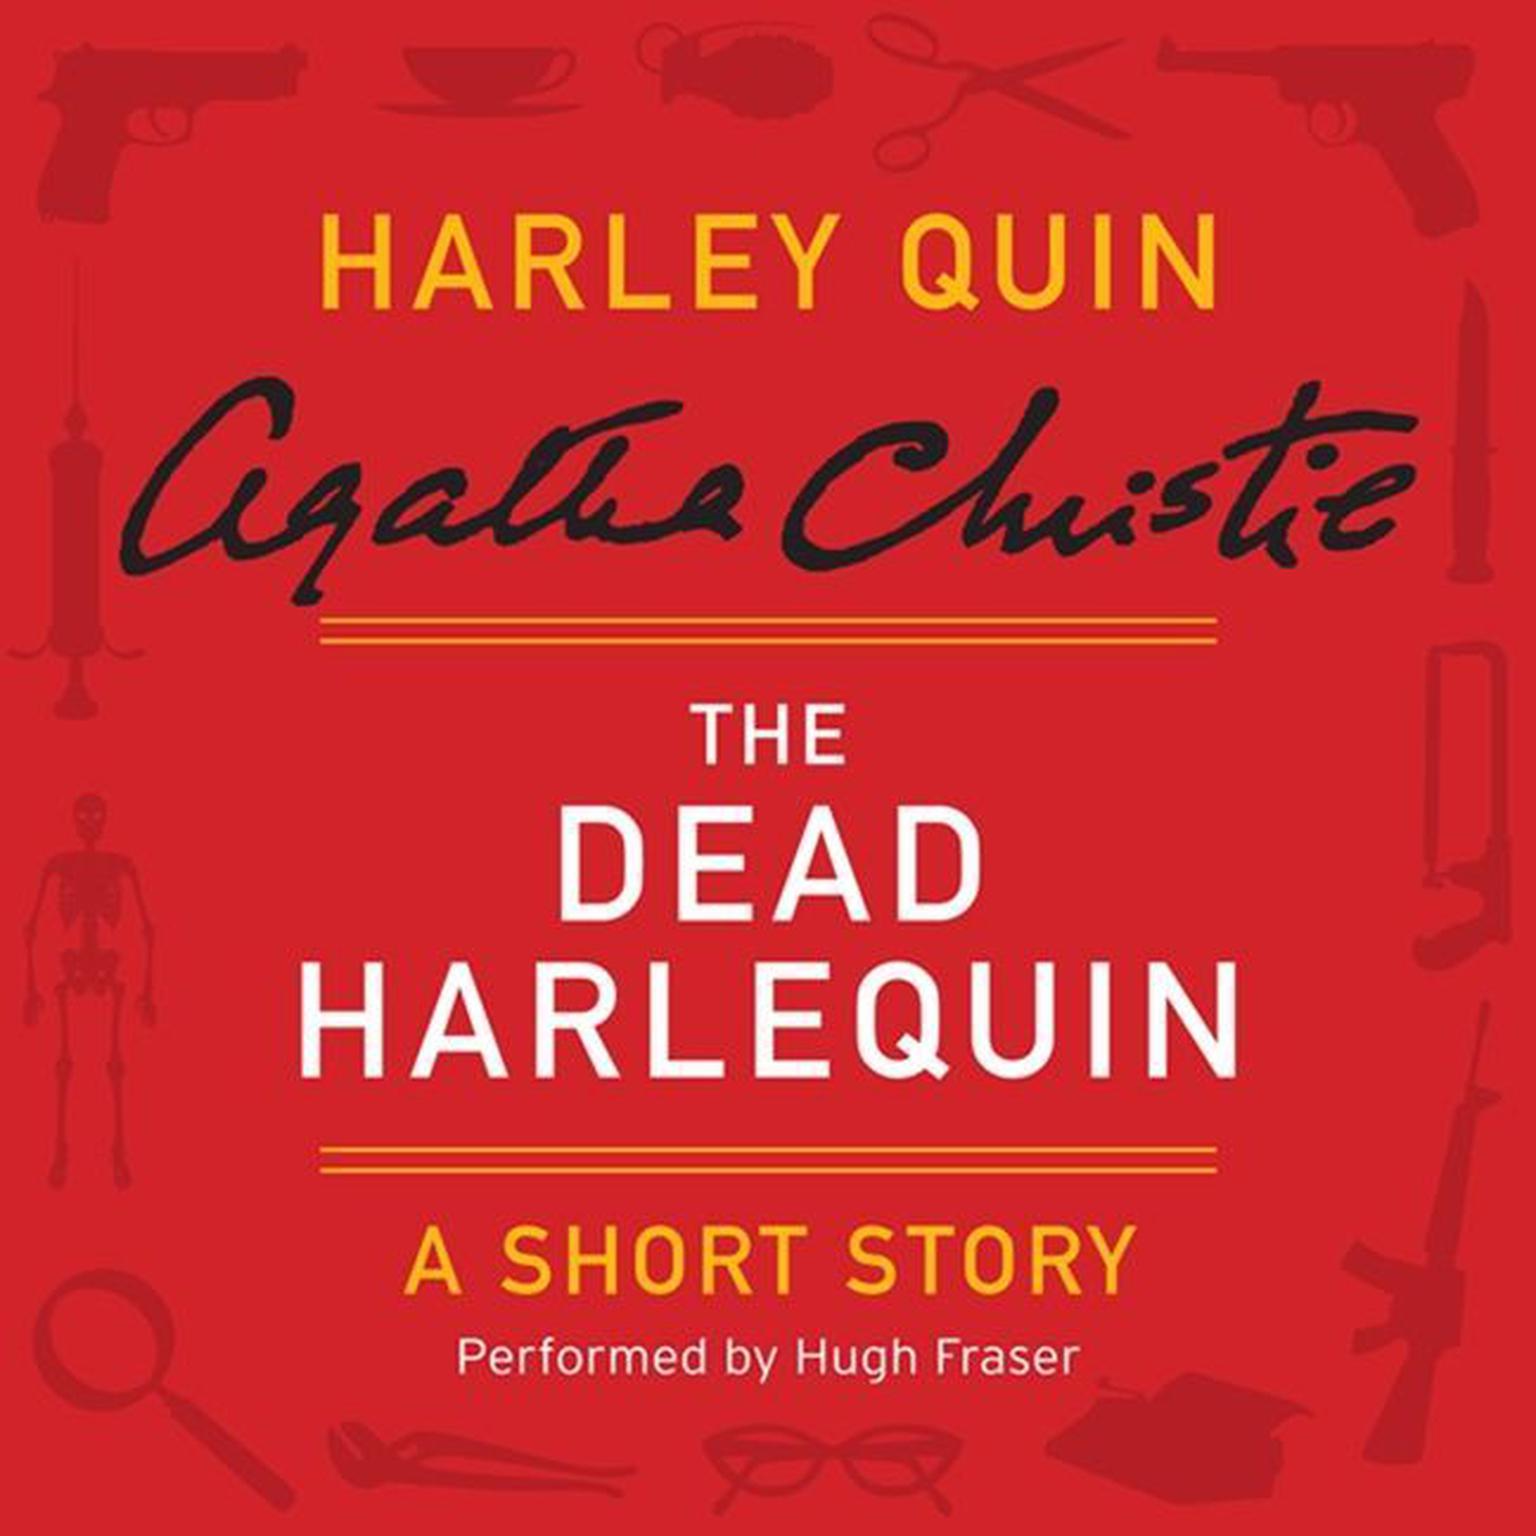 The Dead Harlequin: A Harley Quin Short Story Audiobook, by Agatha Christie